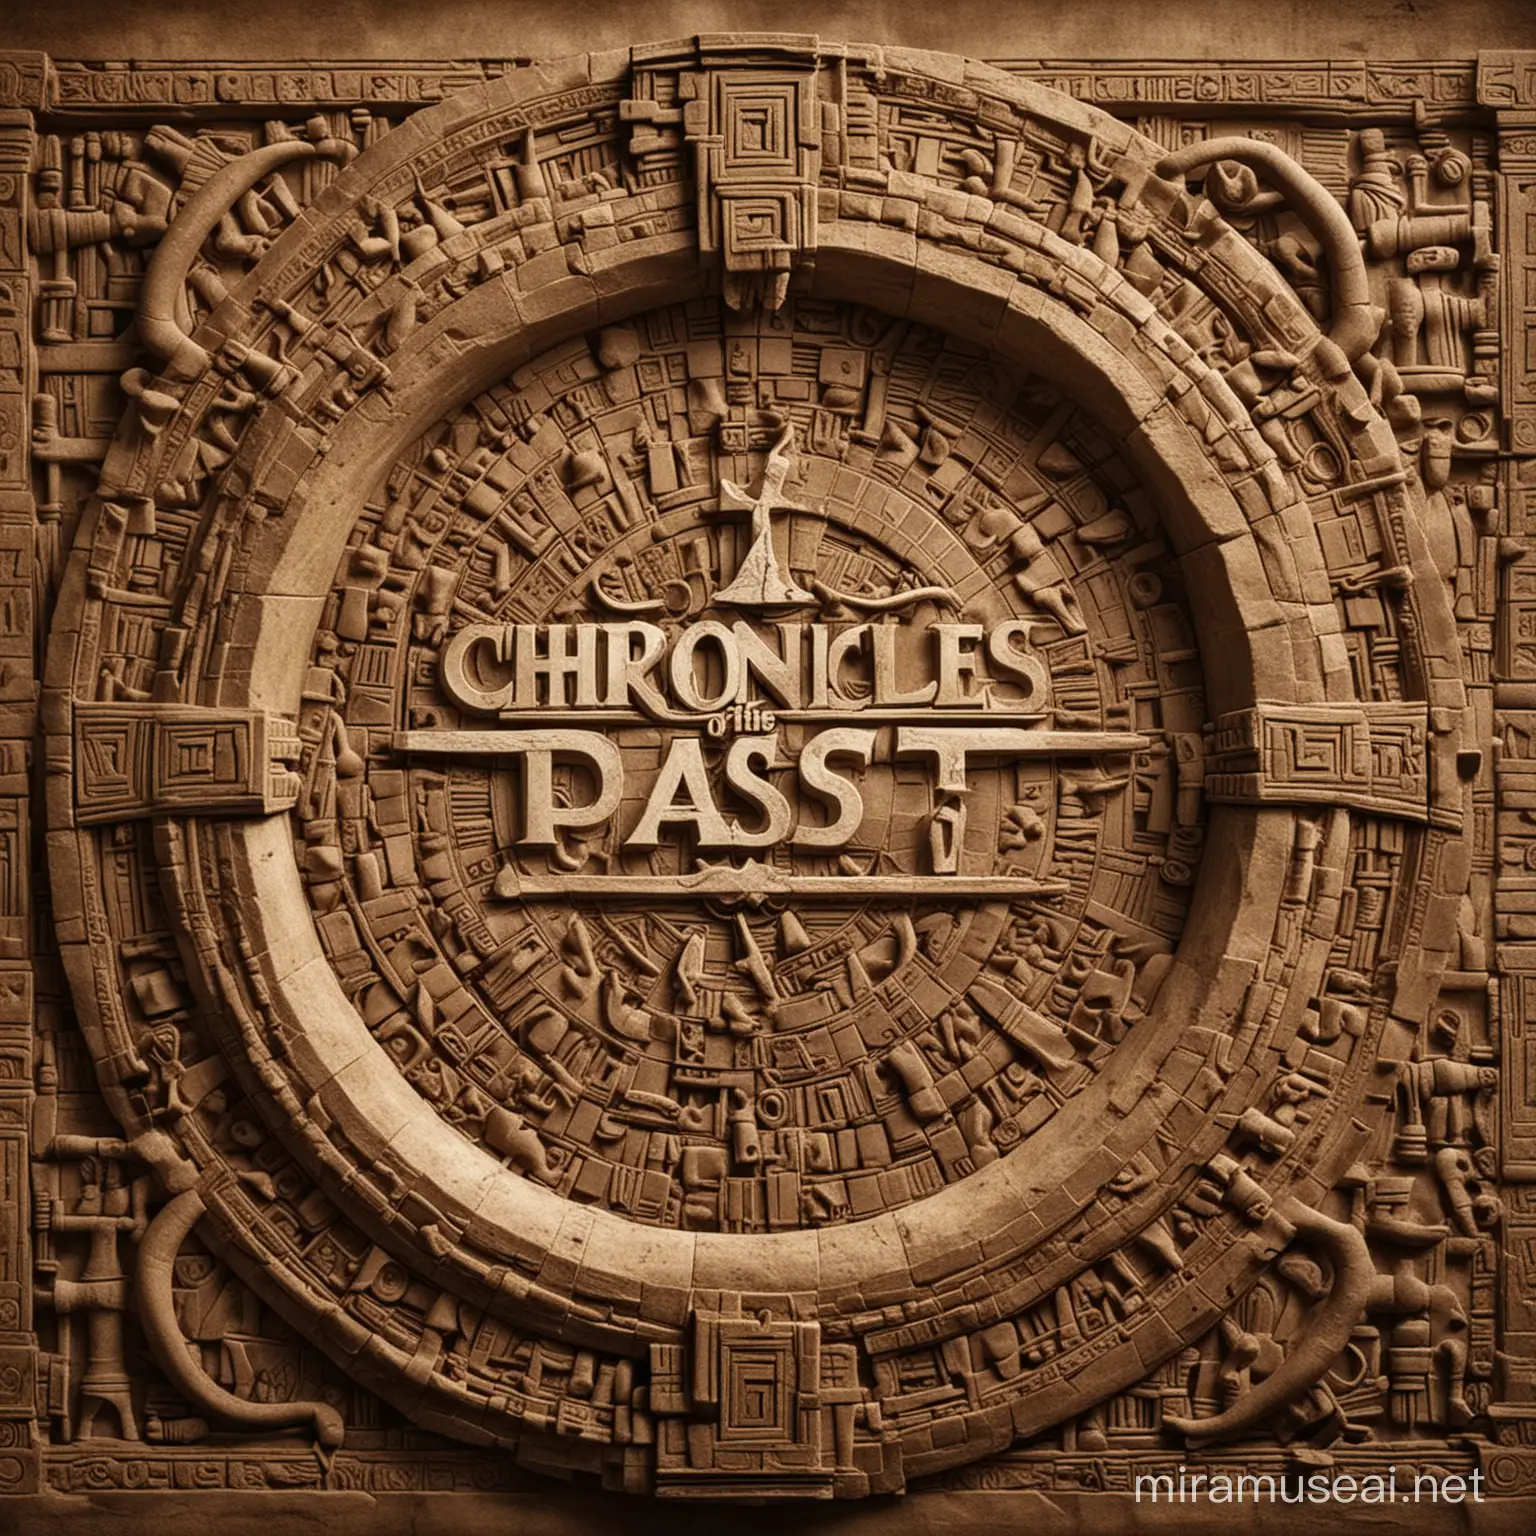 Chronicles of the Past Fusion of Ancient and Modern Elements in Historical Exploration Artwork